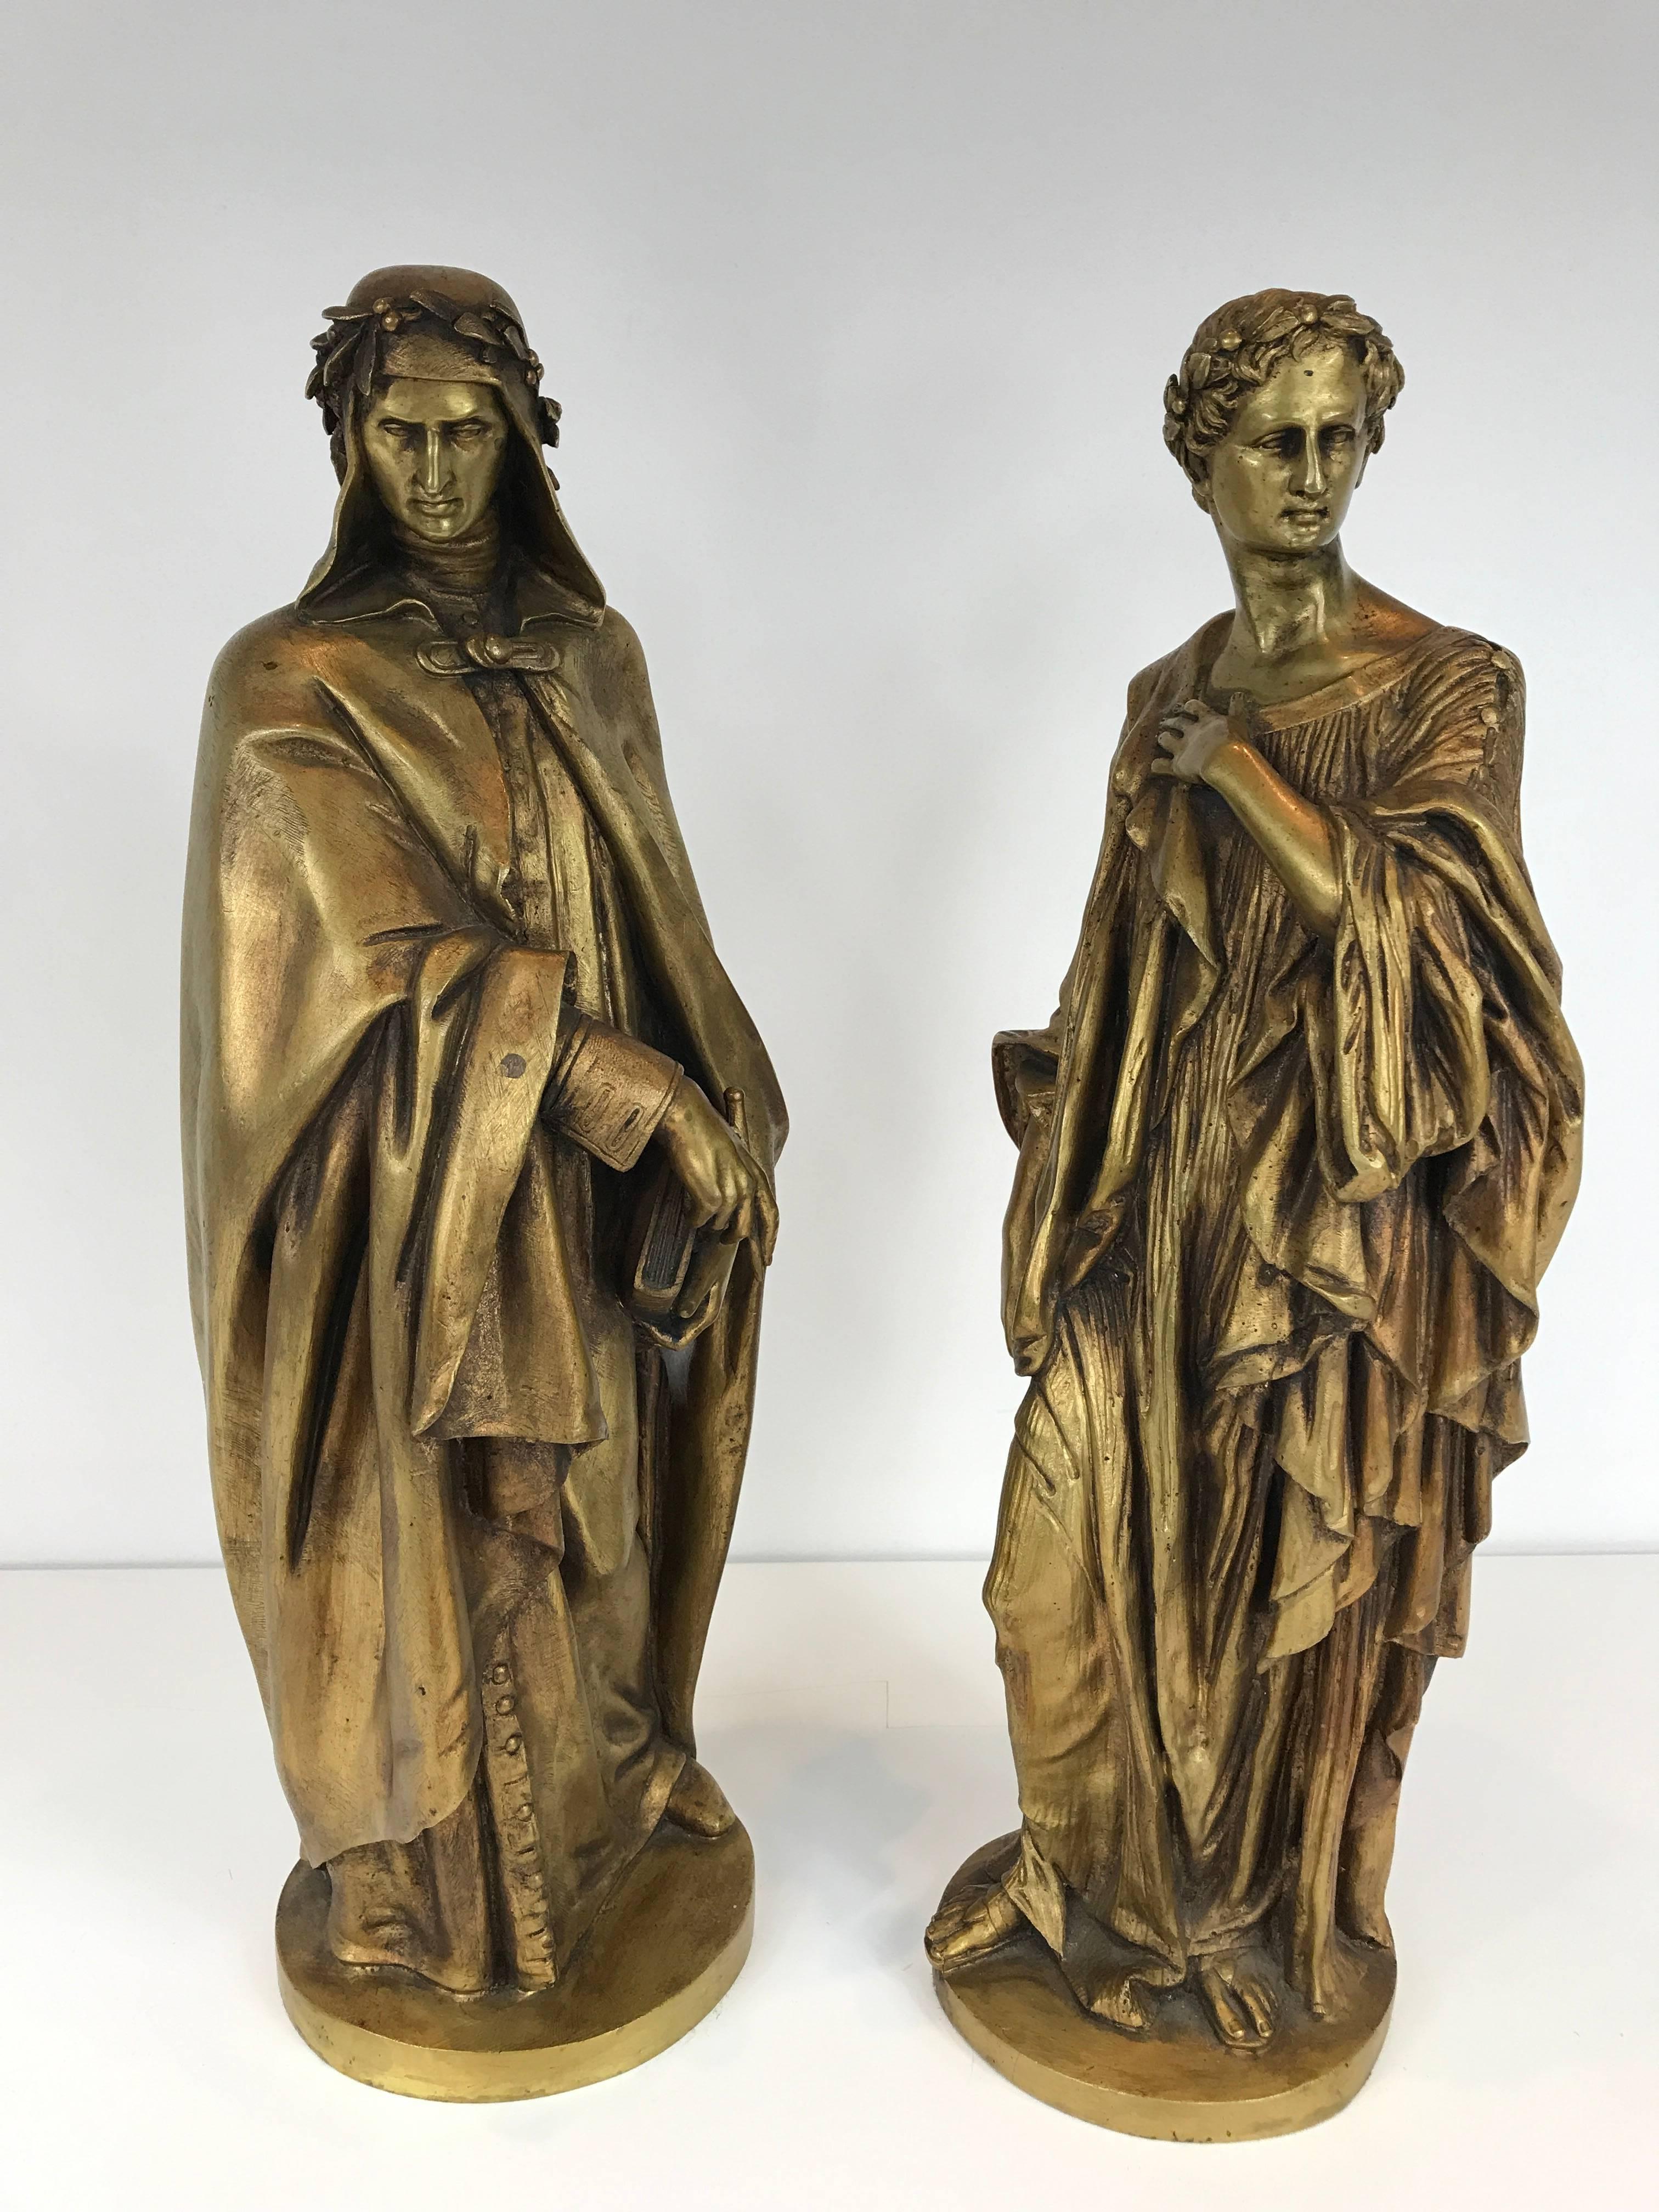 Large pair of gilt bronze classical figures. Great quality casting with beautiful draping and details.